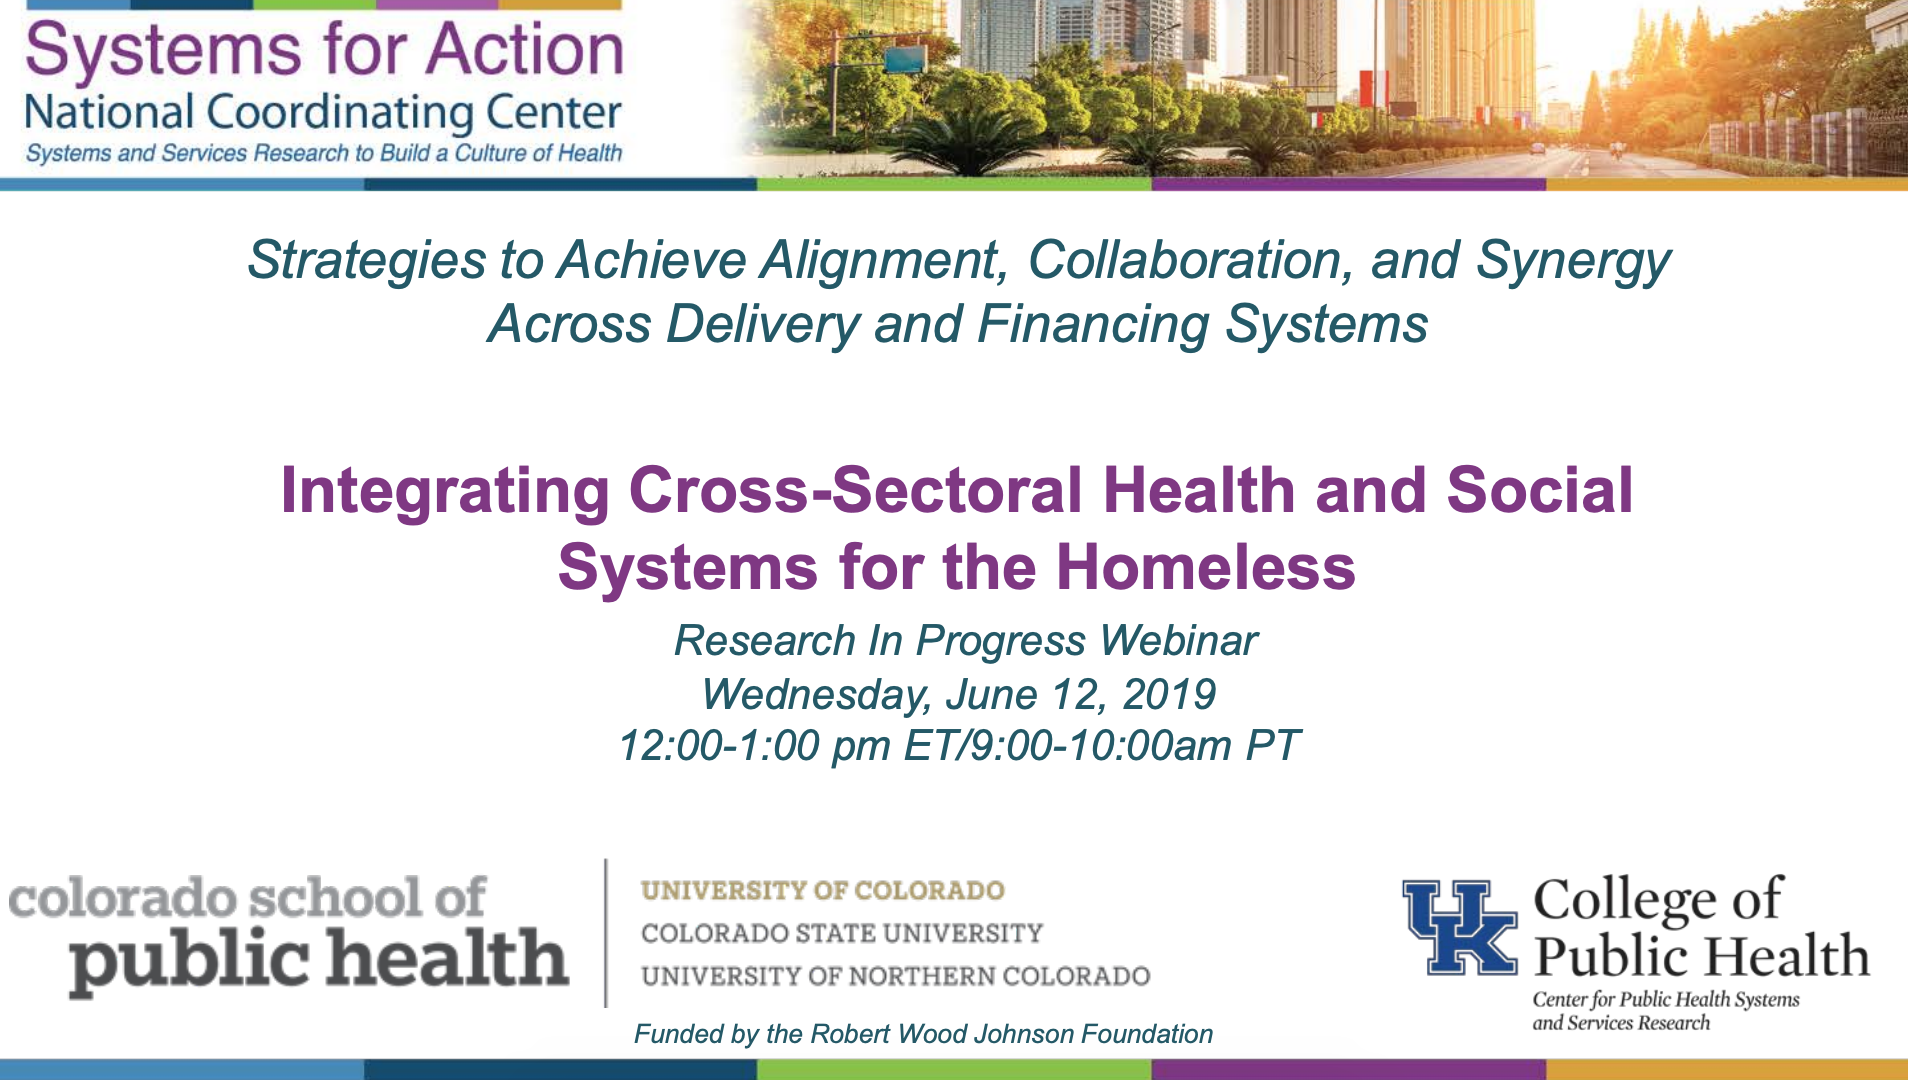 Strategies to Achieve Alignment, Collaboration, and Synergy Across Delivery and Financing Systems: Integrating Cross-Sectoral Health and Social Systems for the Homeless